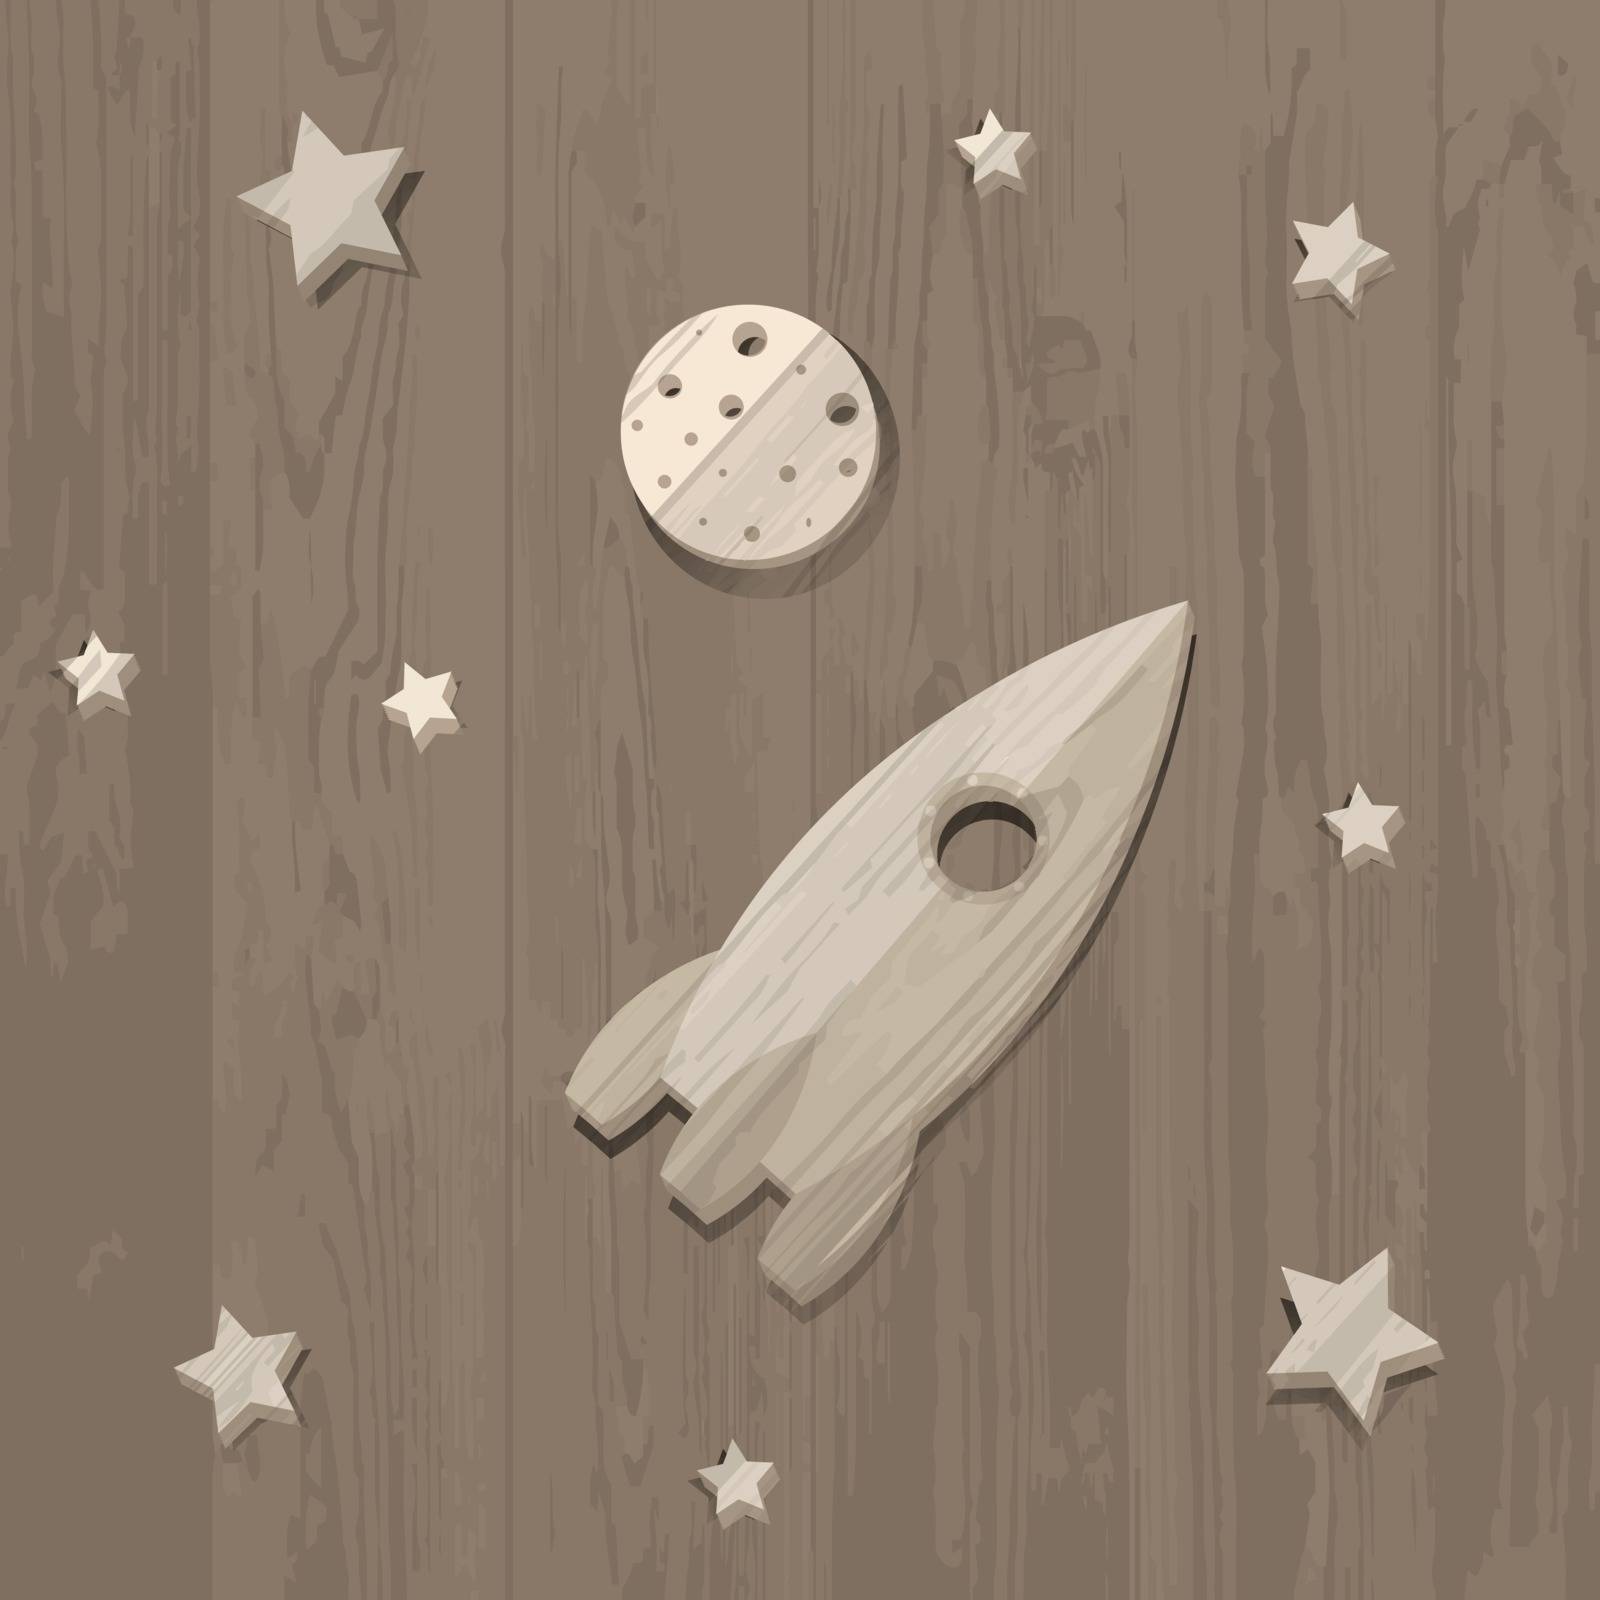 wooden rocket, moon and stars on wooden background 10 eps